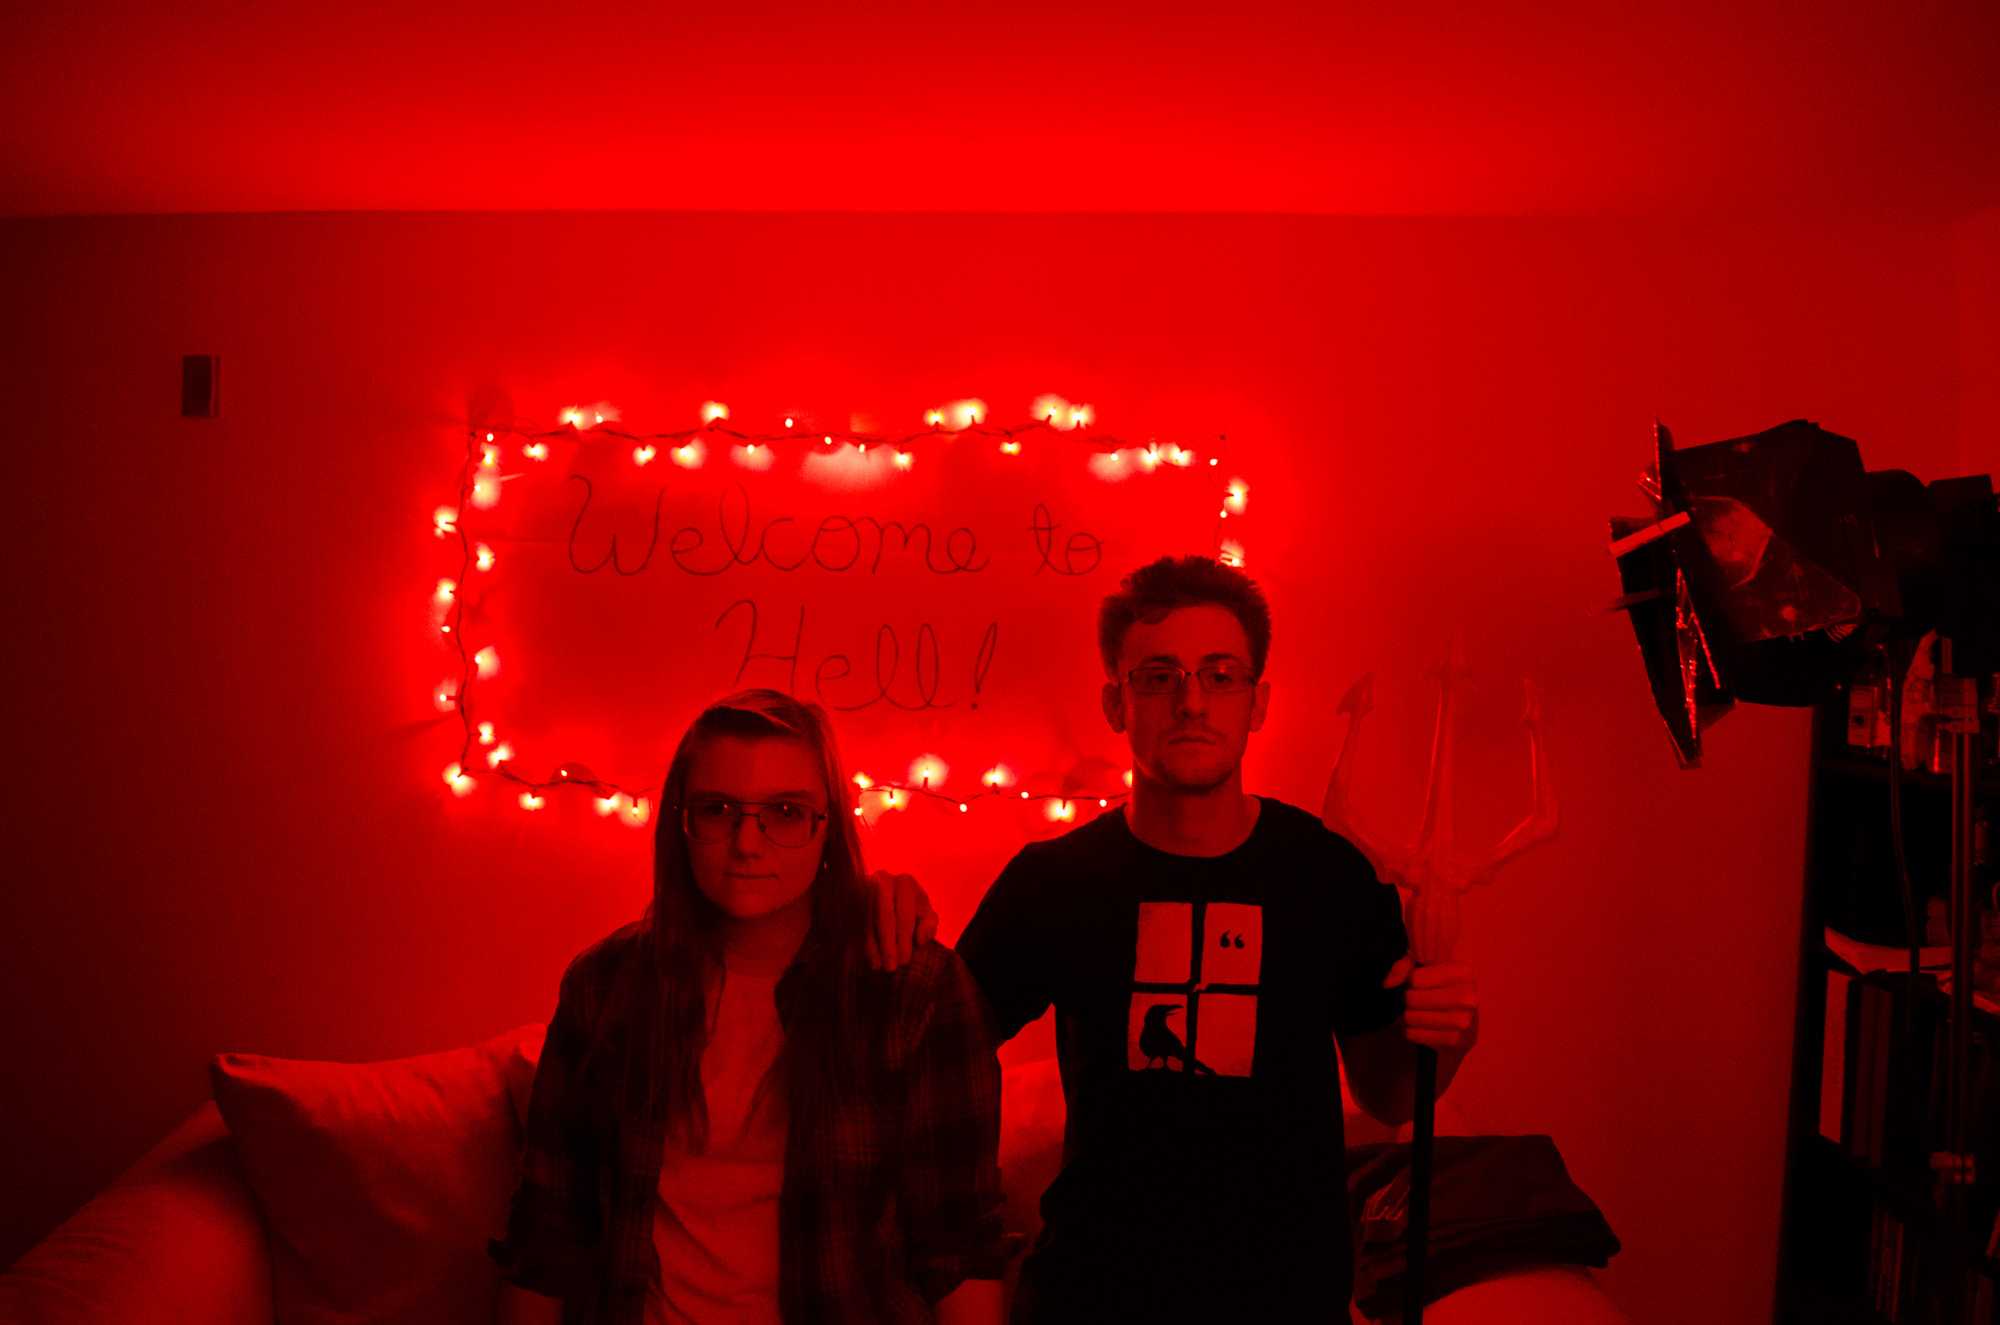 Melody Fayth Marshall and Alex Adcock on set of Dianes Inferno directed by Melanie Lech. The film was one winner of the Do Not Eat More Than One script contest.